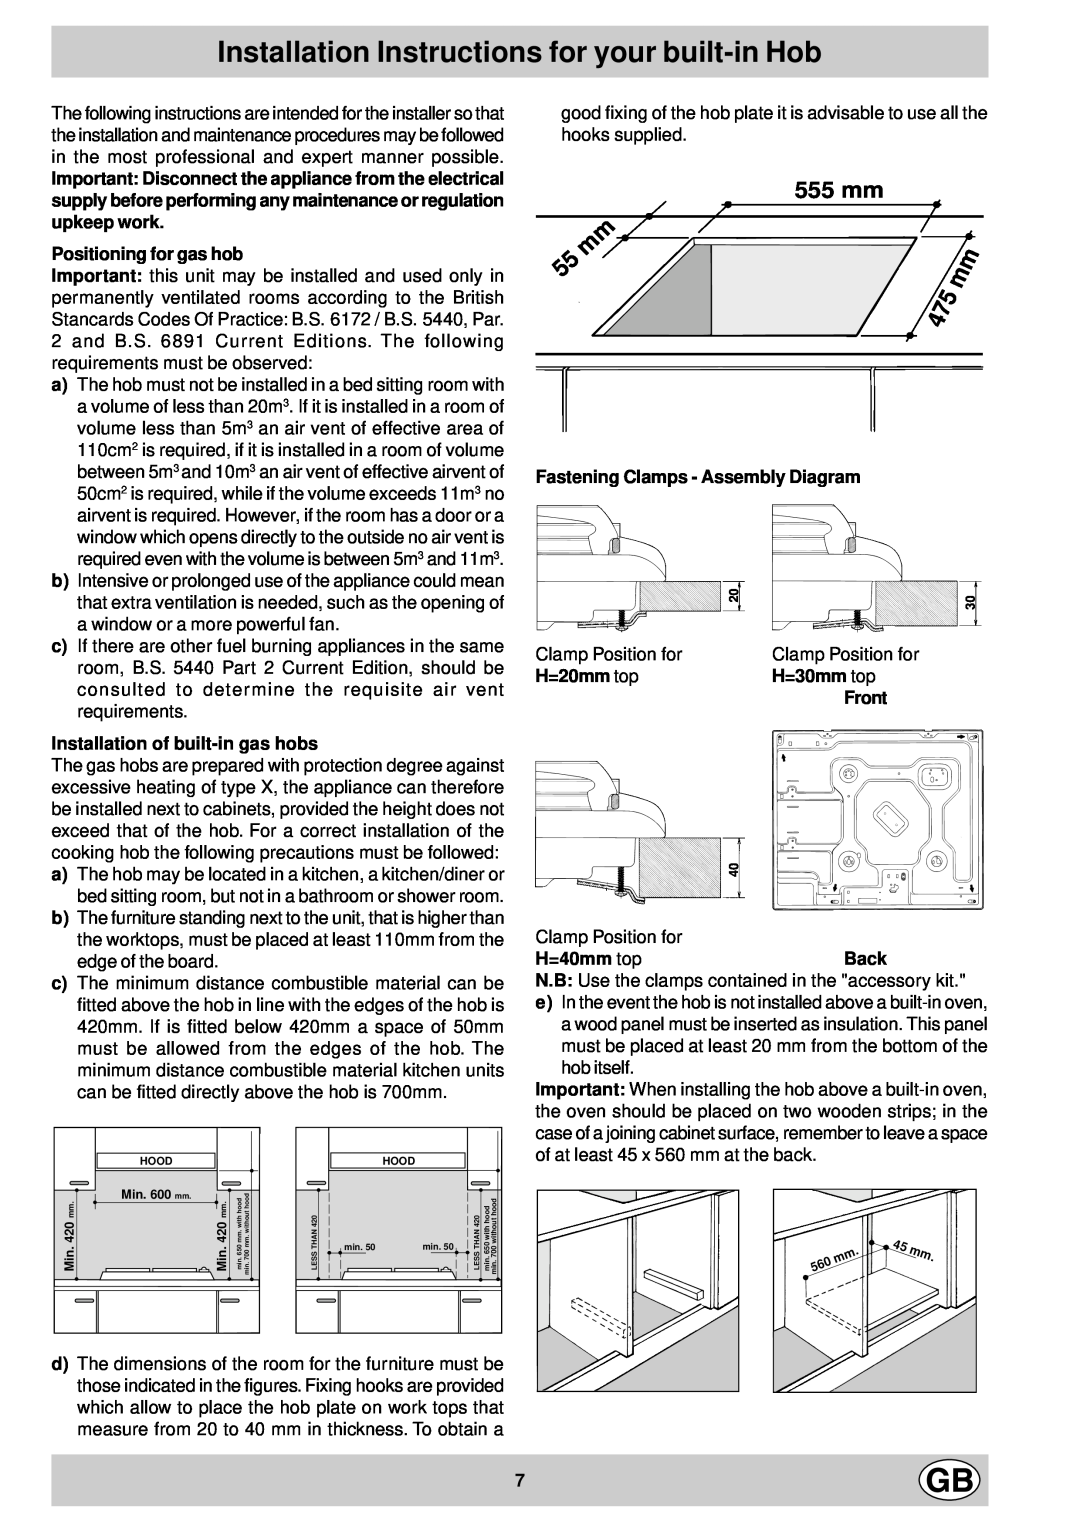 Hotpoint GC640 Installation Instructions for your built-in Hob, 555 mm, Positioning for gas hob, H=20mm top, H=30mm top 